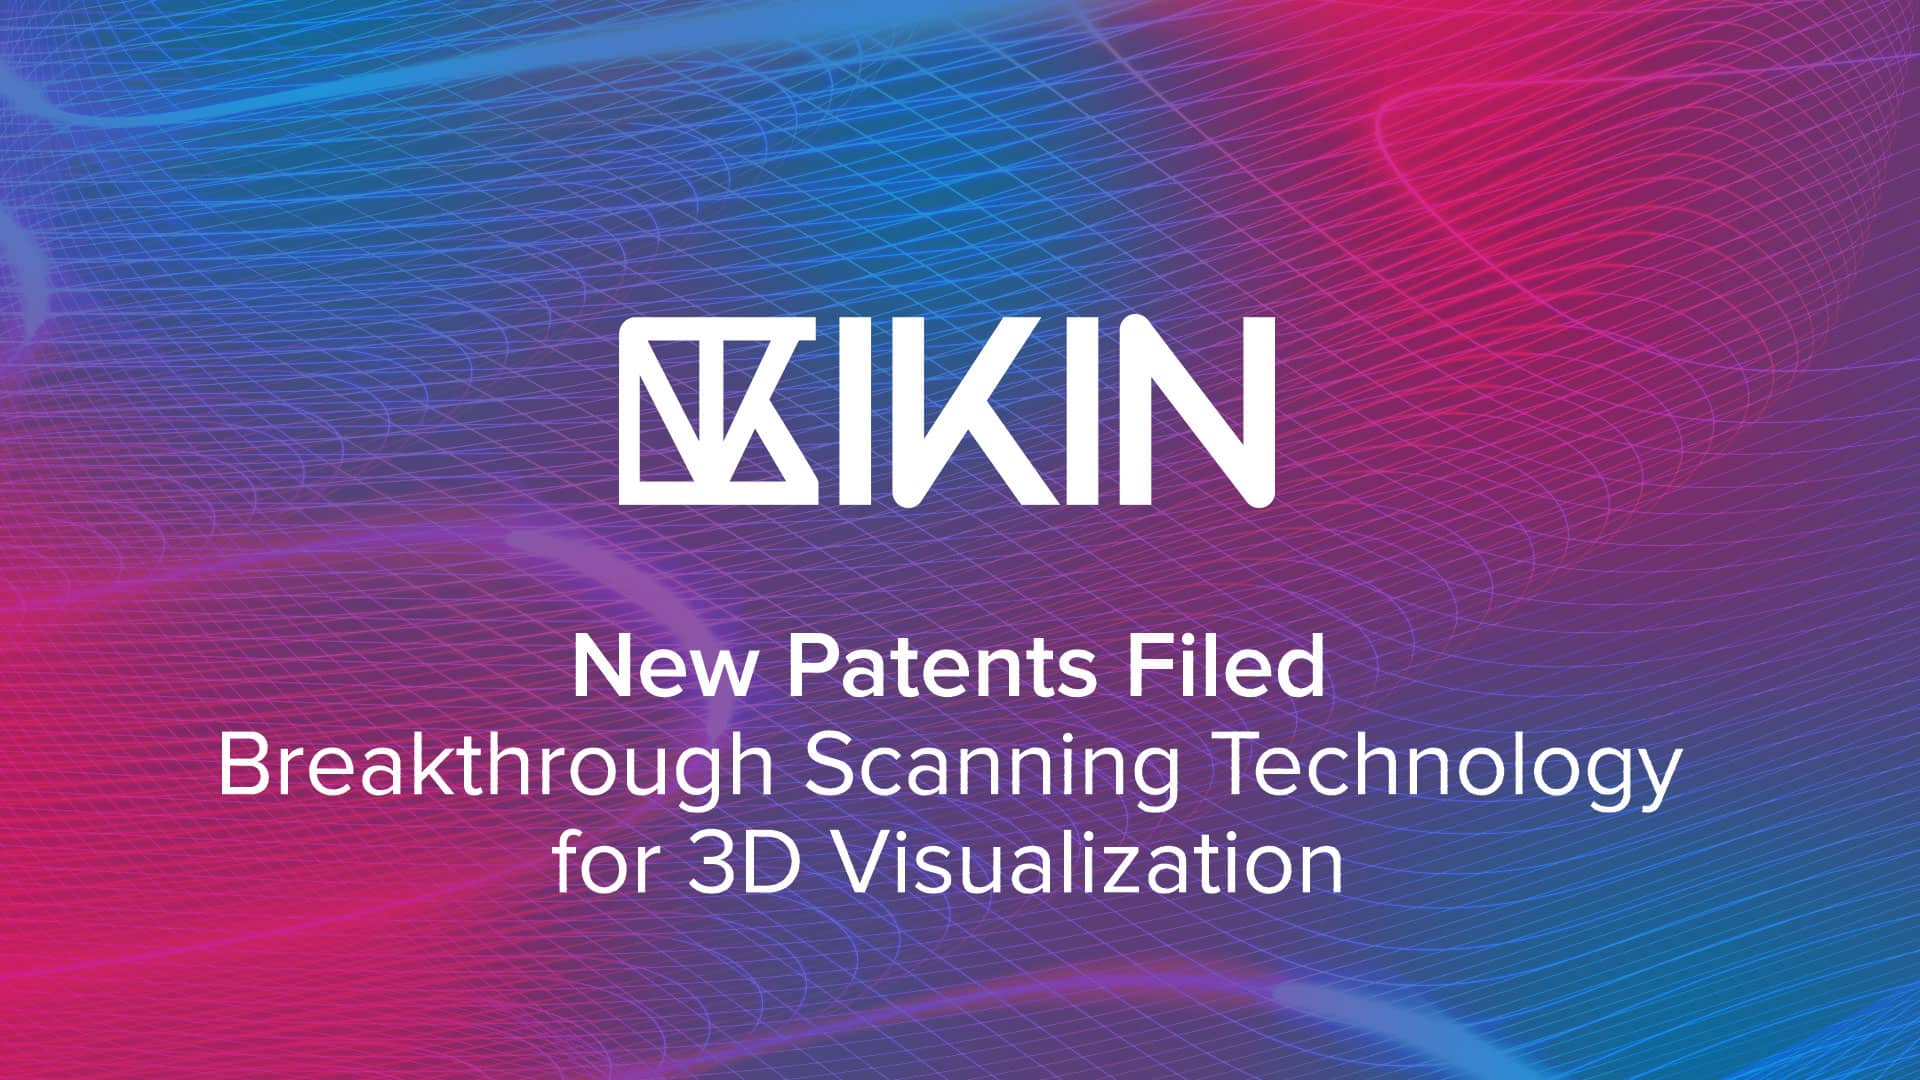 IKIN files patents for breakthrough in creating rapid 3D visualization (thumbnail image)